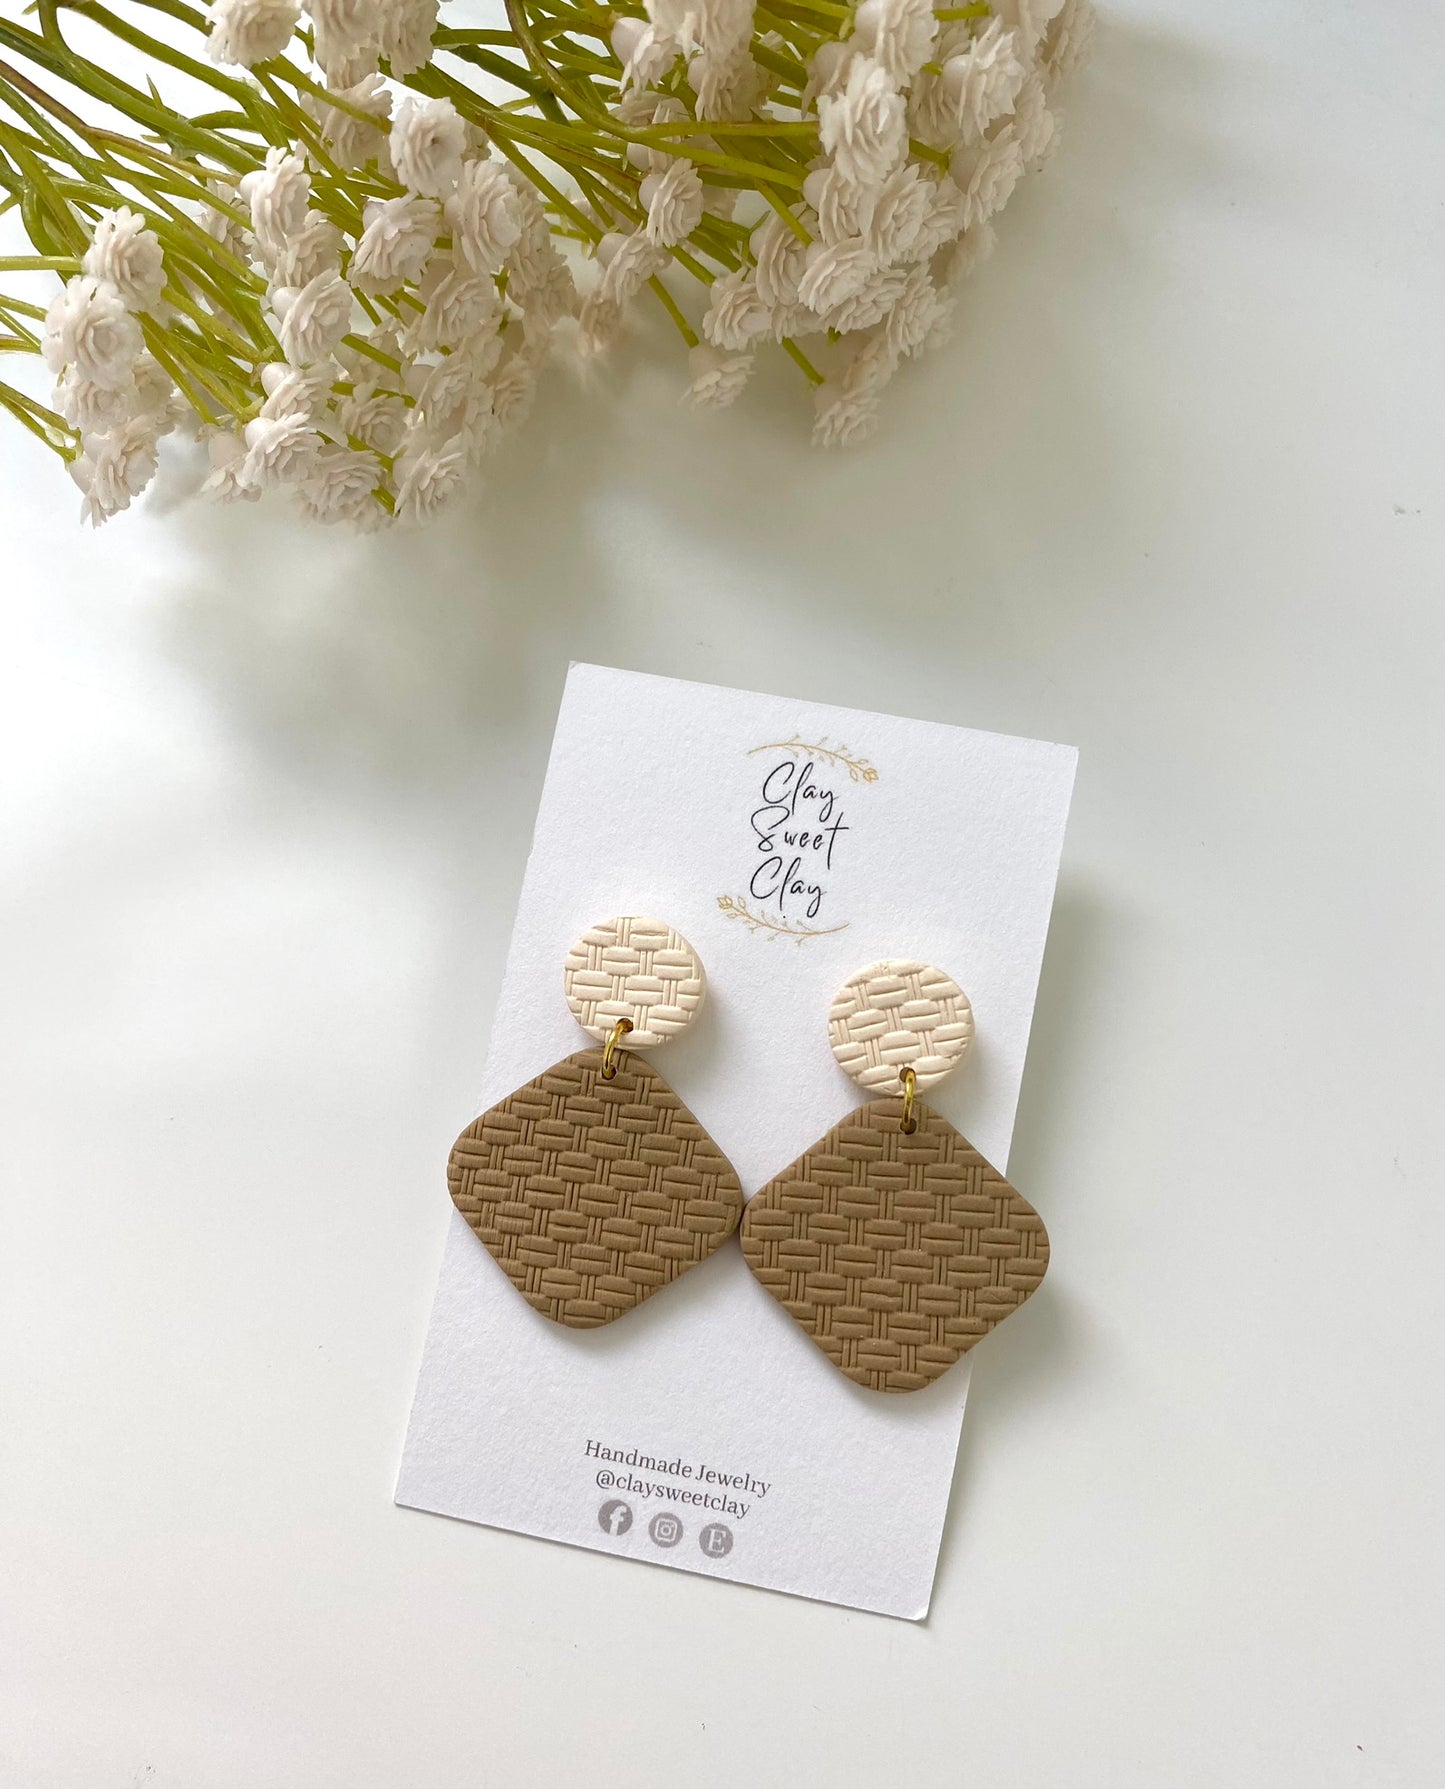 Basket Weave Textured Clay Earrings - Rounded Square